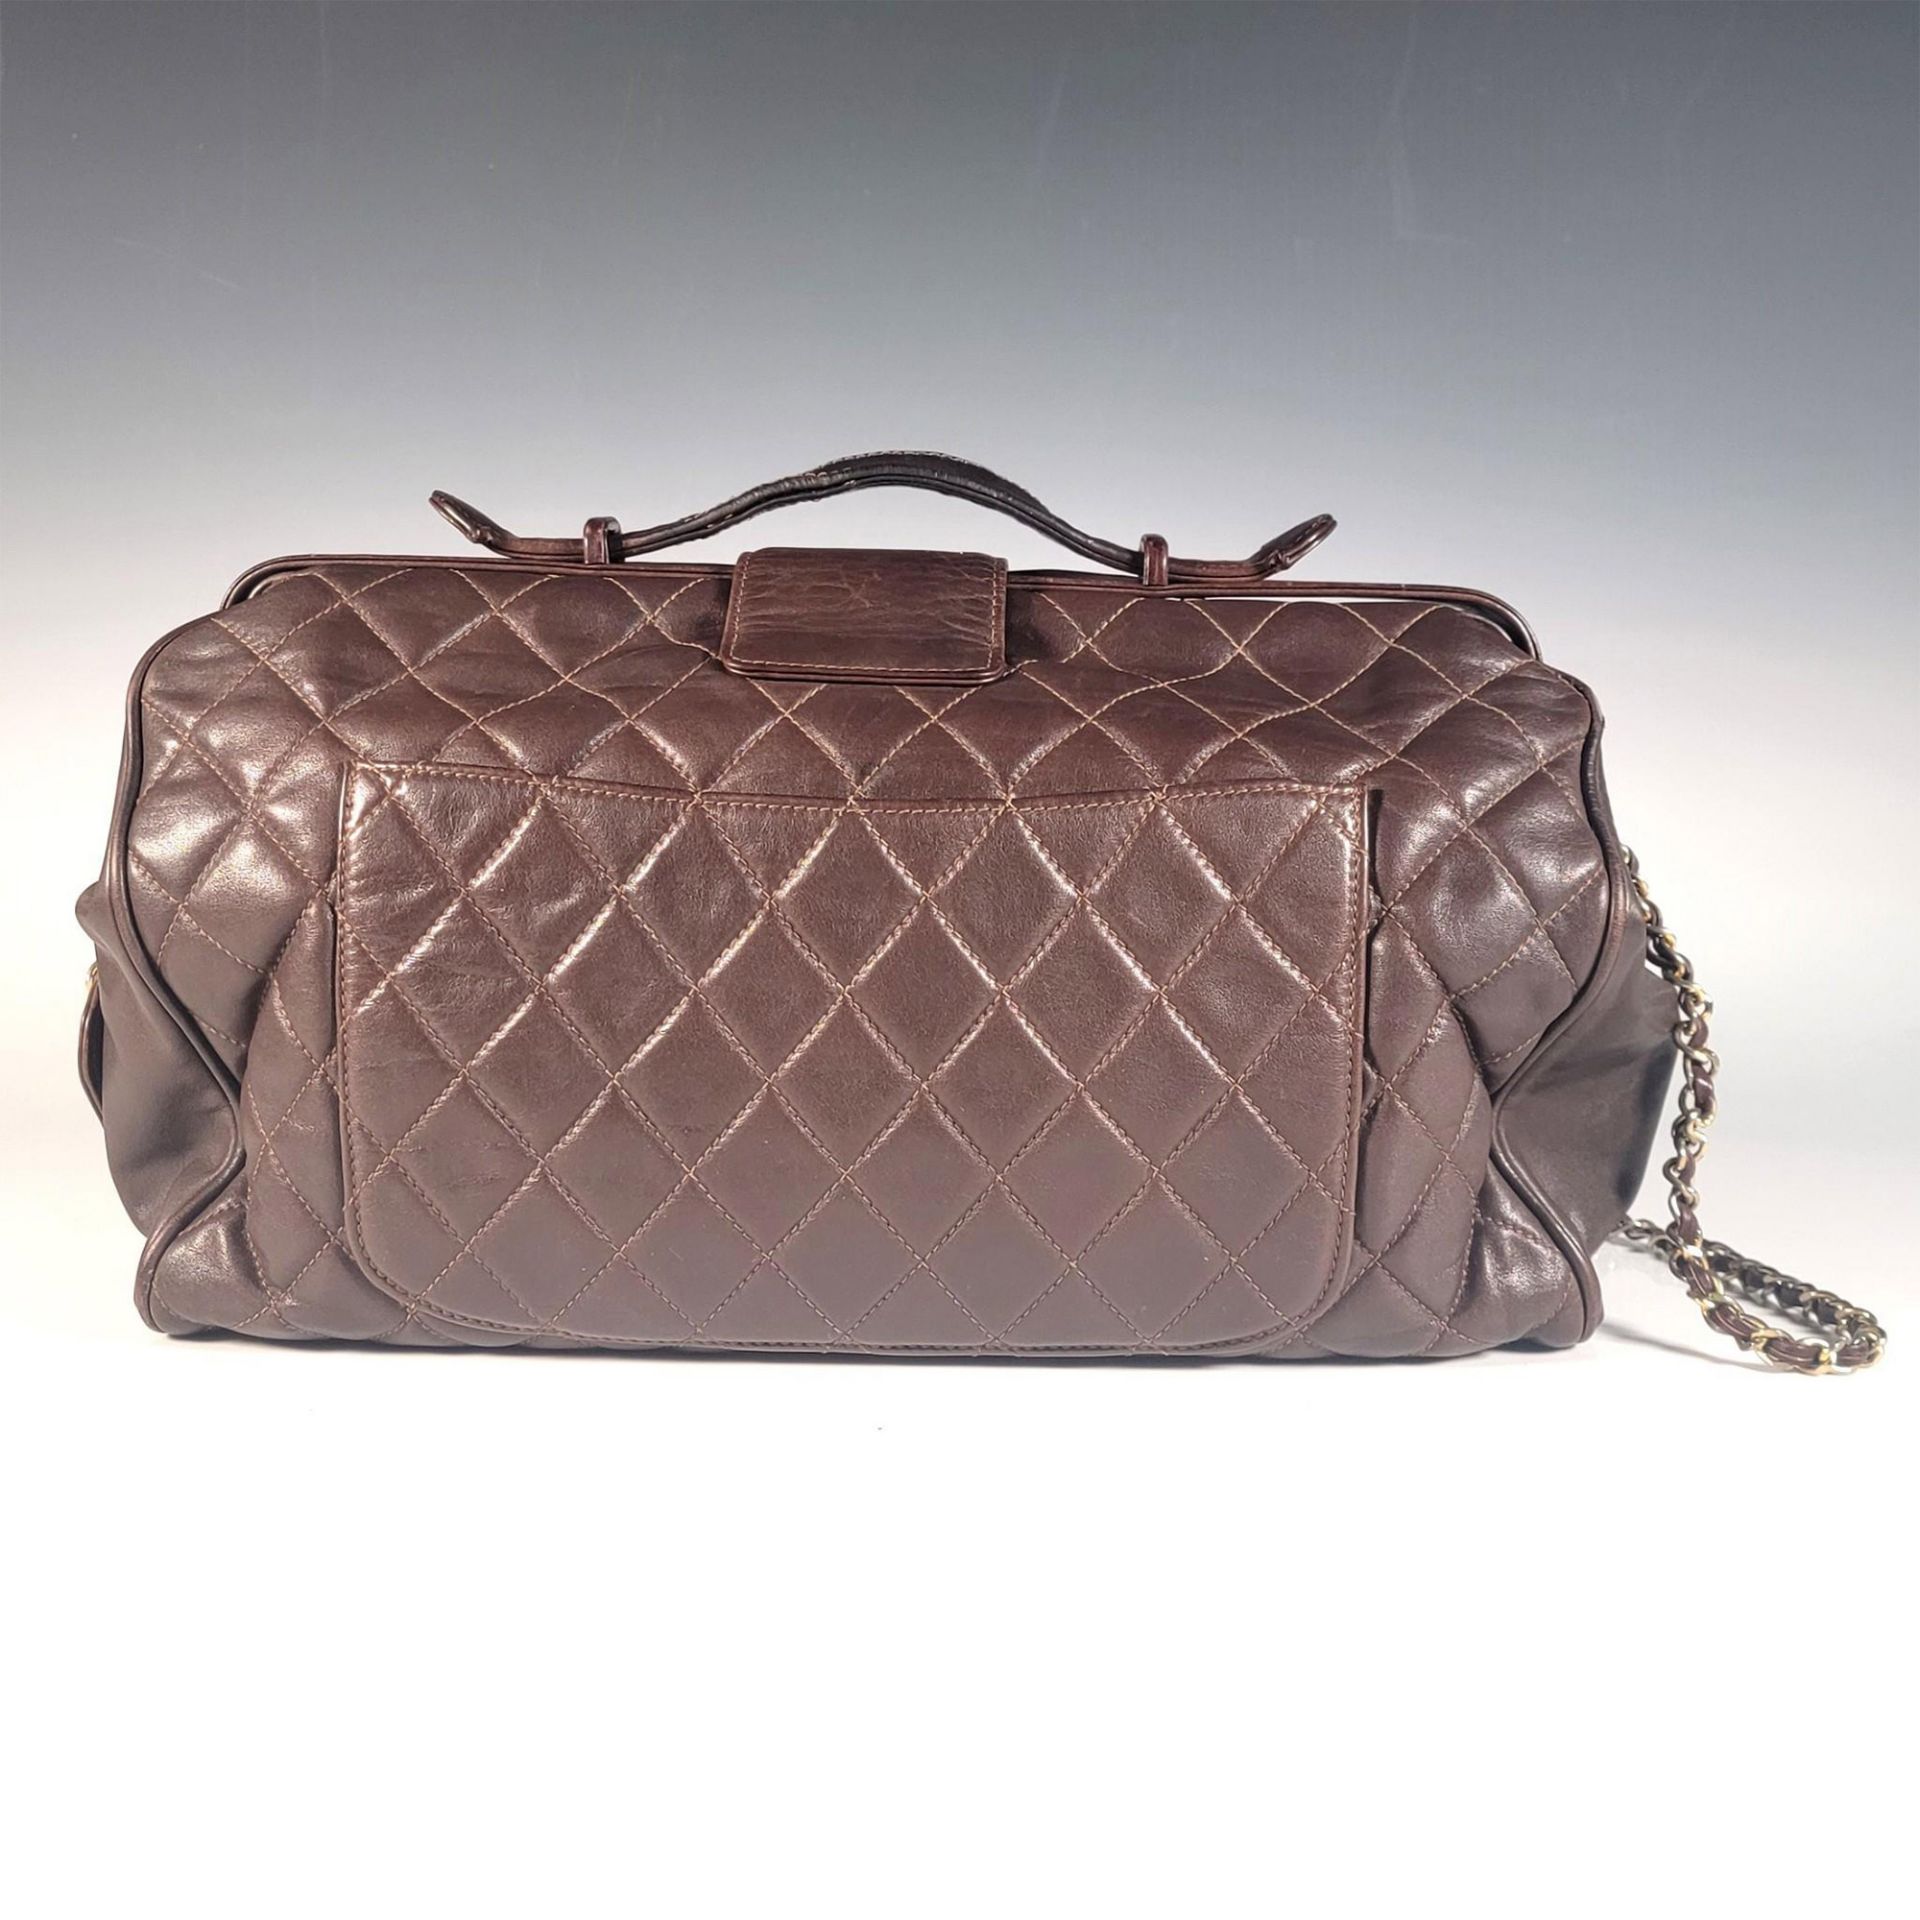 Authentic Chanel Brown Quilted Leather Large Doctor Bag - Image 2 of 4